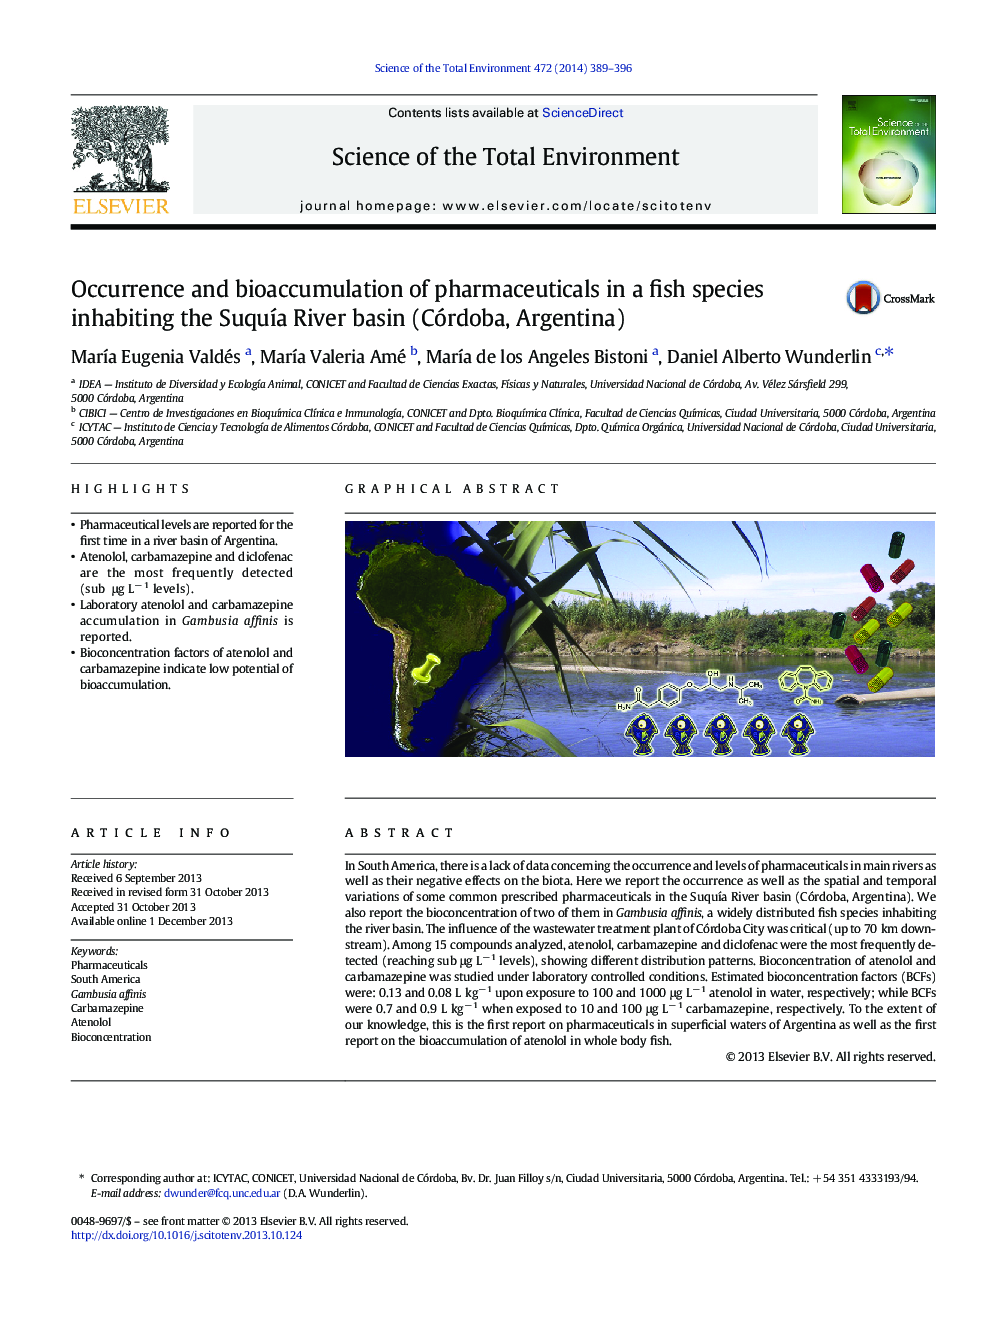 Occurrence and bioaccumulation of pharmaceuticals in a fish species inhabiting the SuquÃ­a River basin (Córdoba, Argentina)